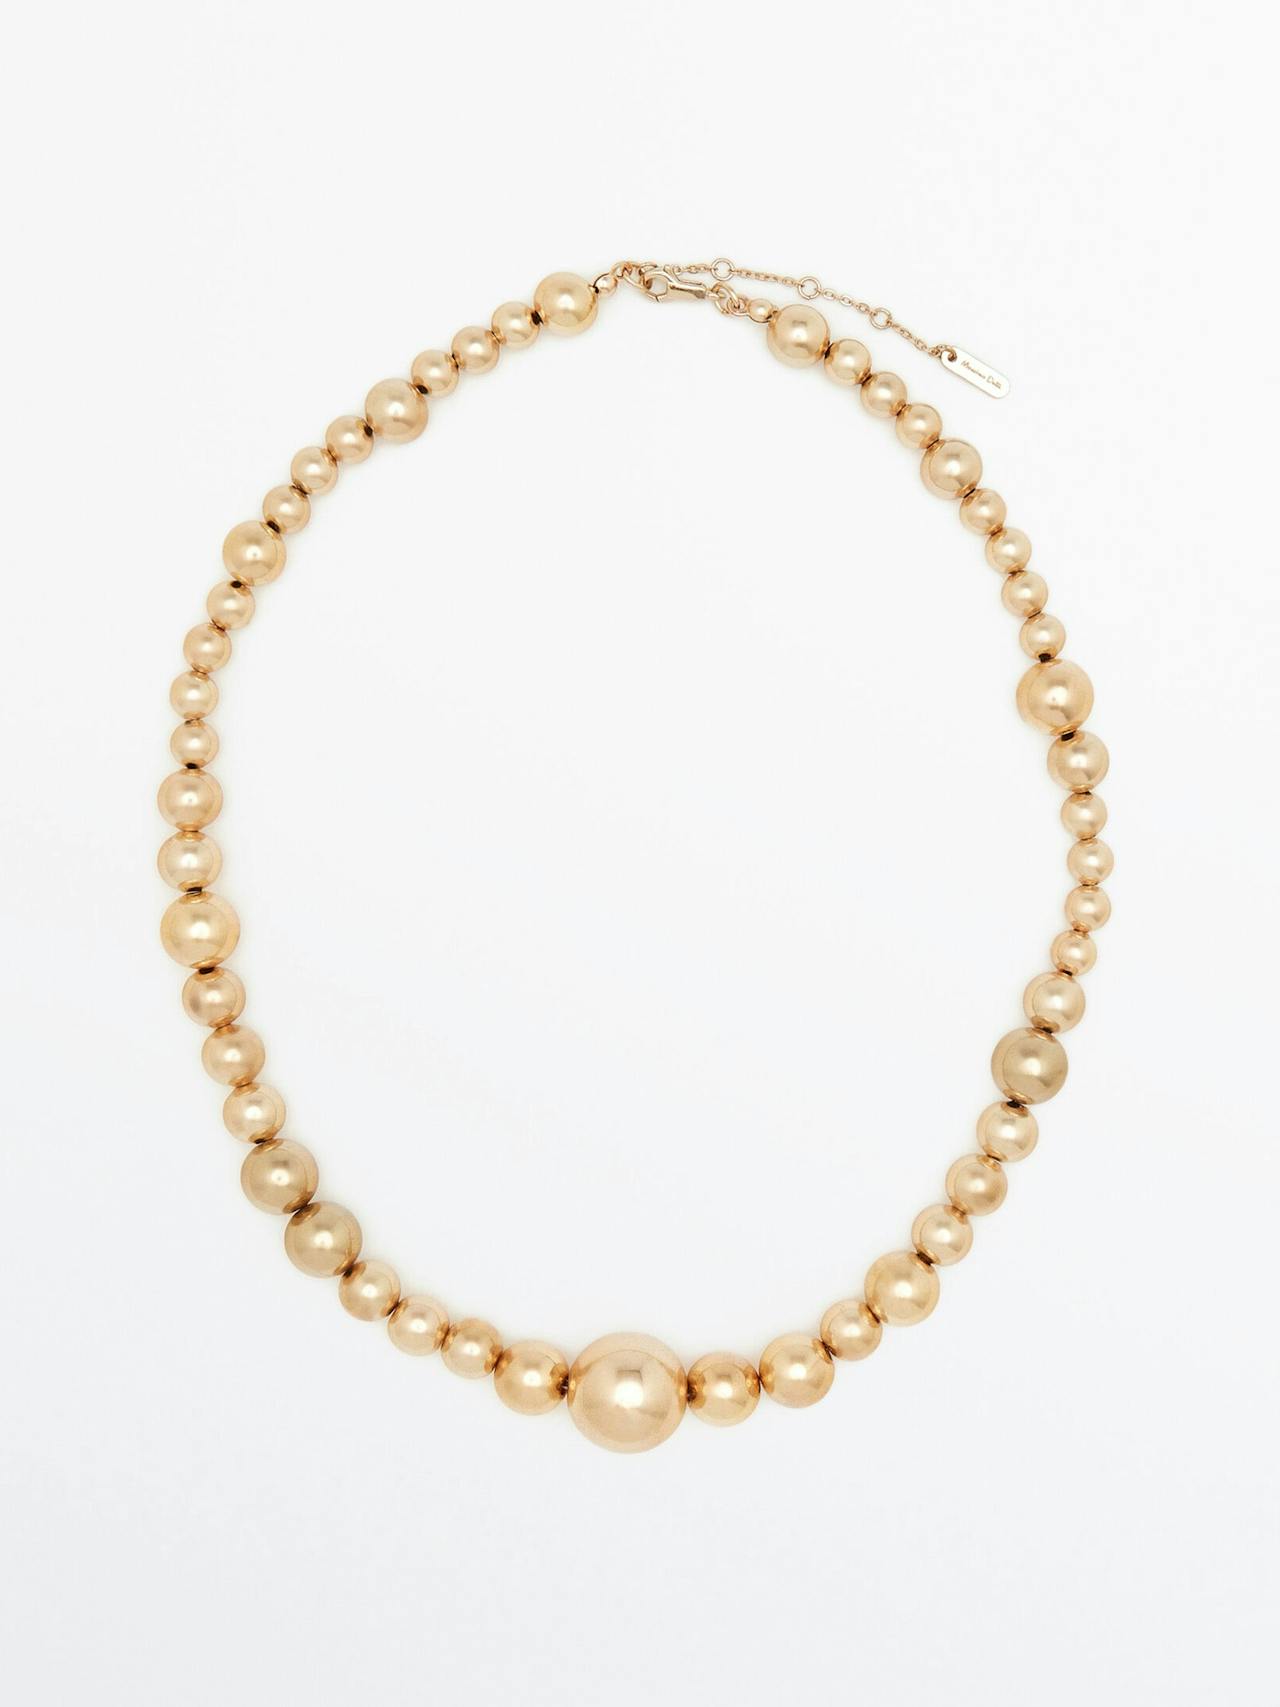 Gold-plated sphere necklace